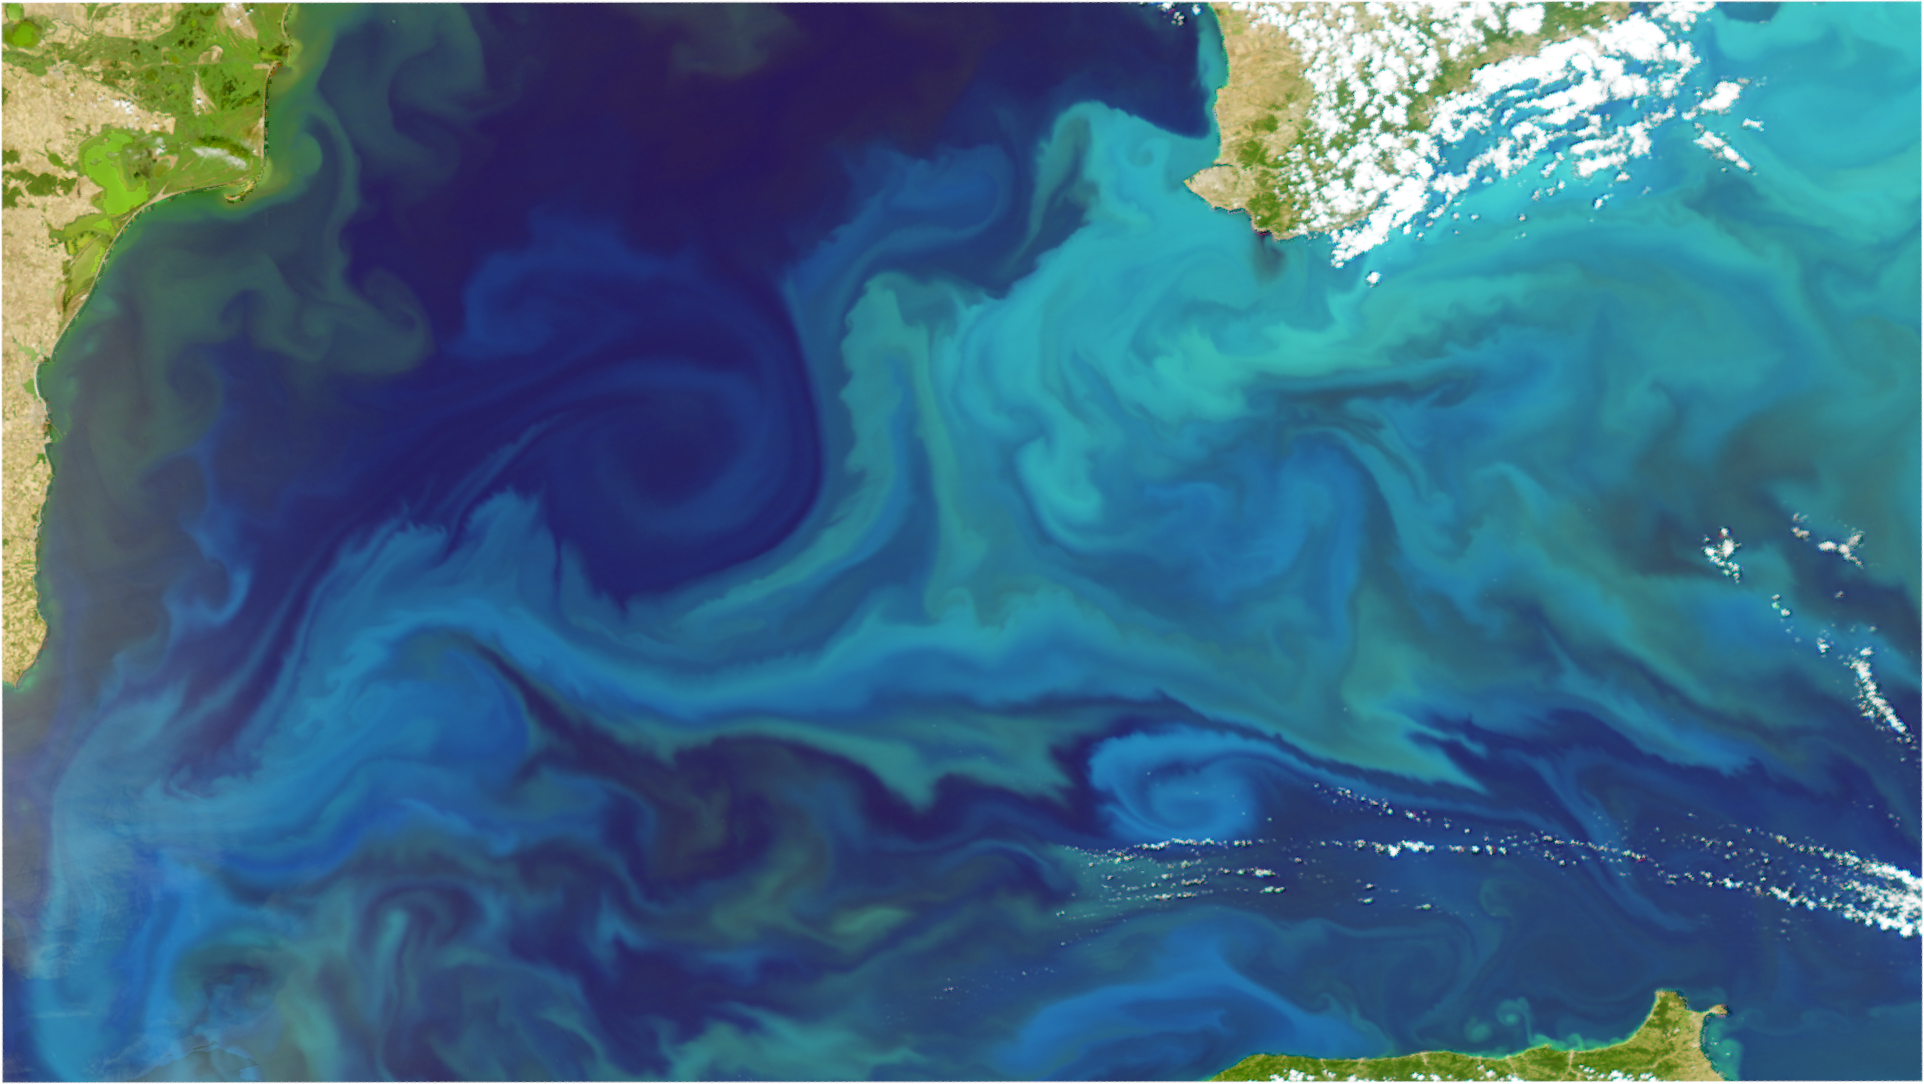 Large turquoise swirls of phytoplankton blooms can be seen dancing through the waters of the Black Sea in this image captured on July 23rd, 2022 by the Aqua MODIS sensor.